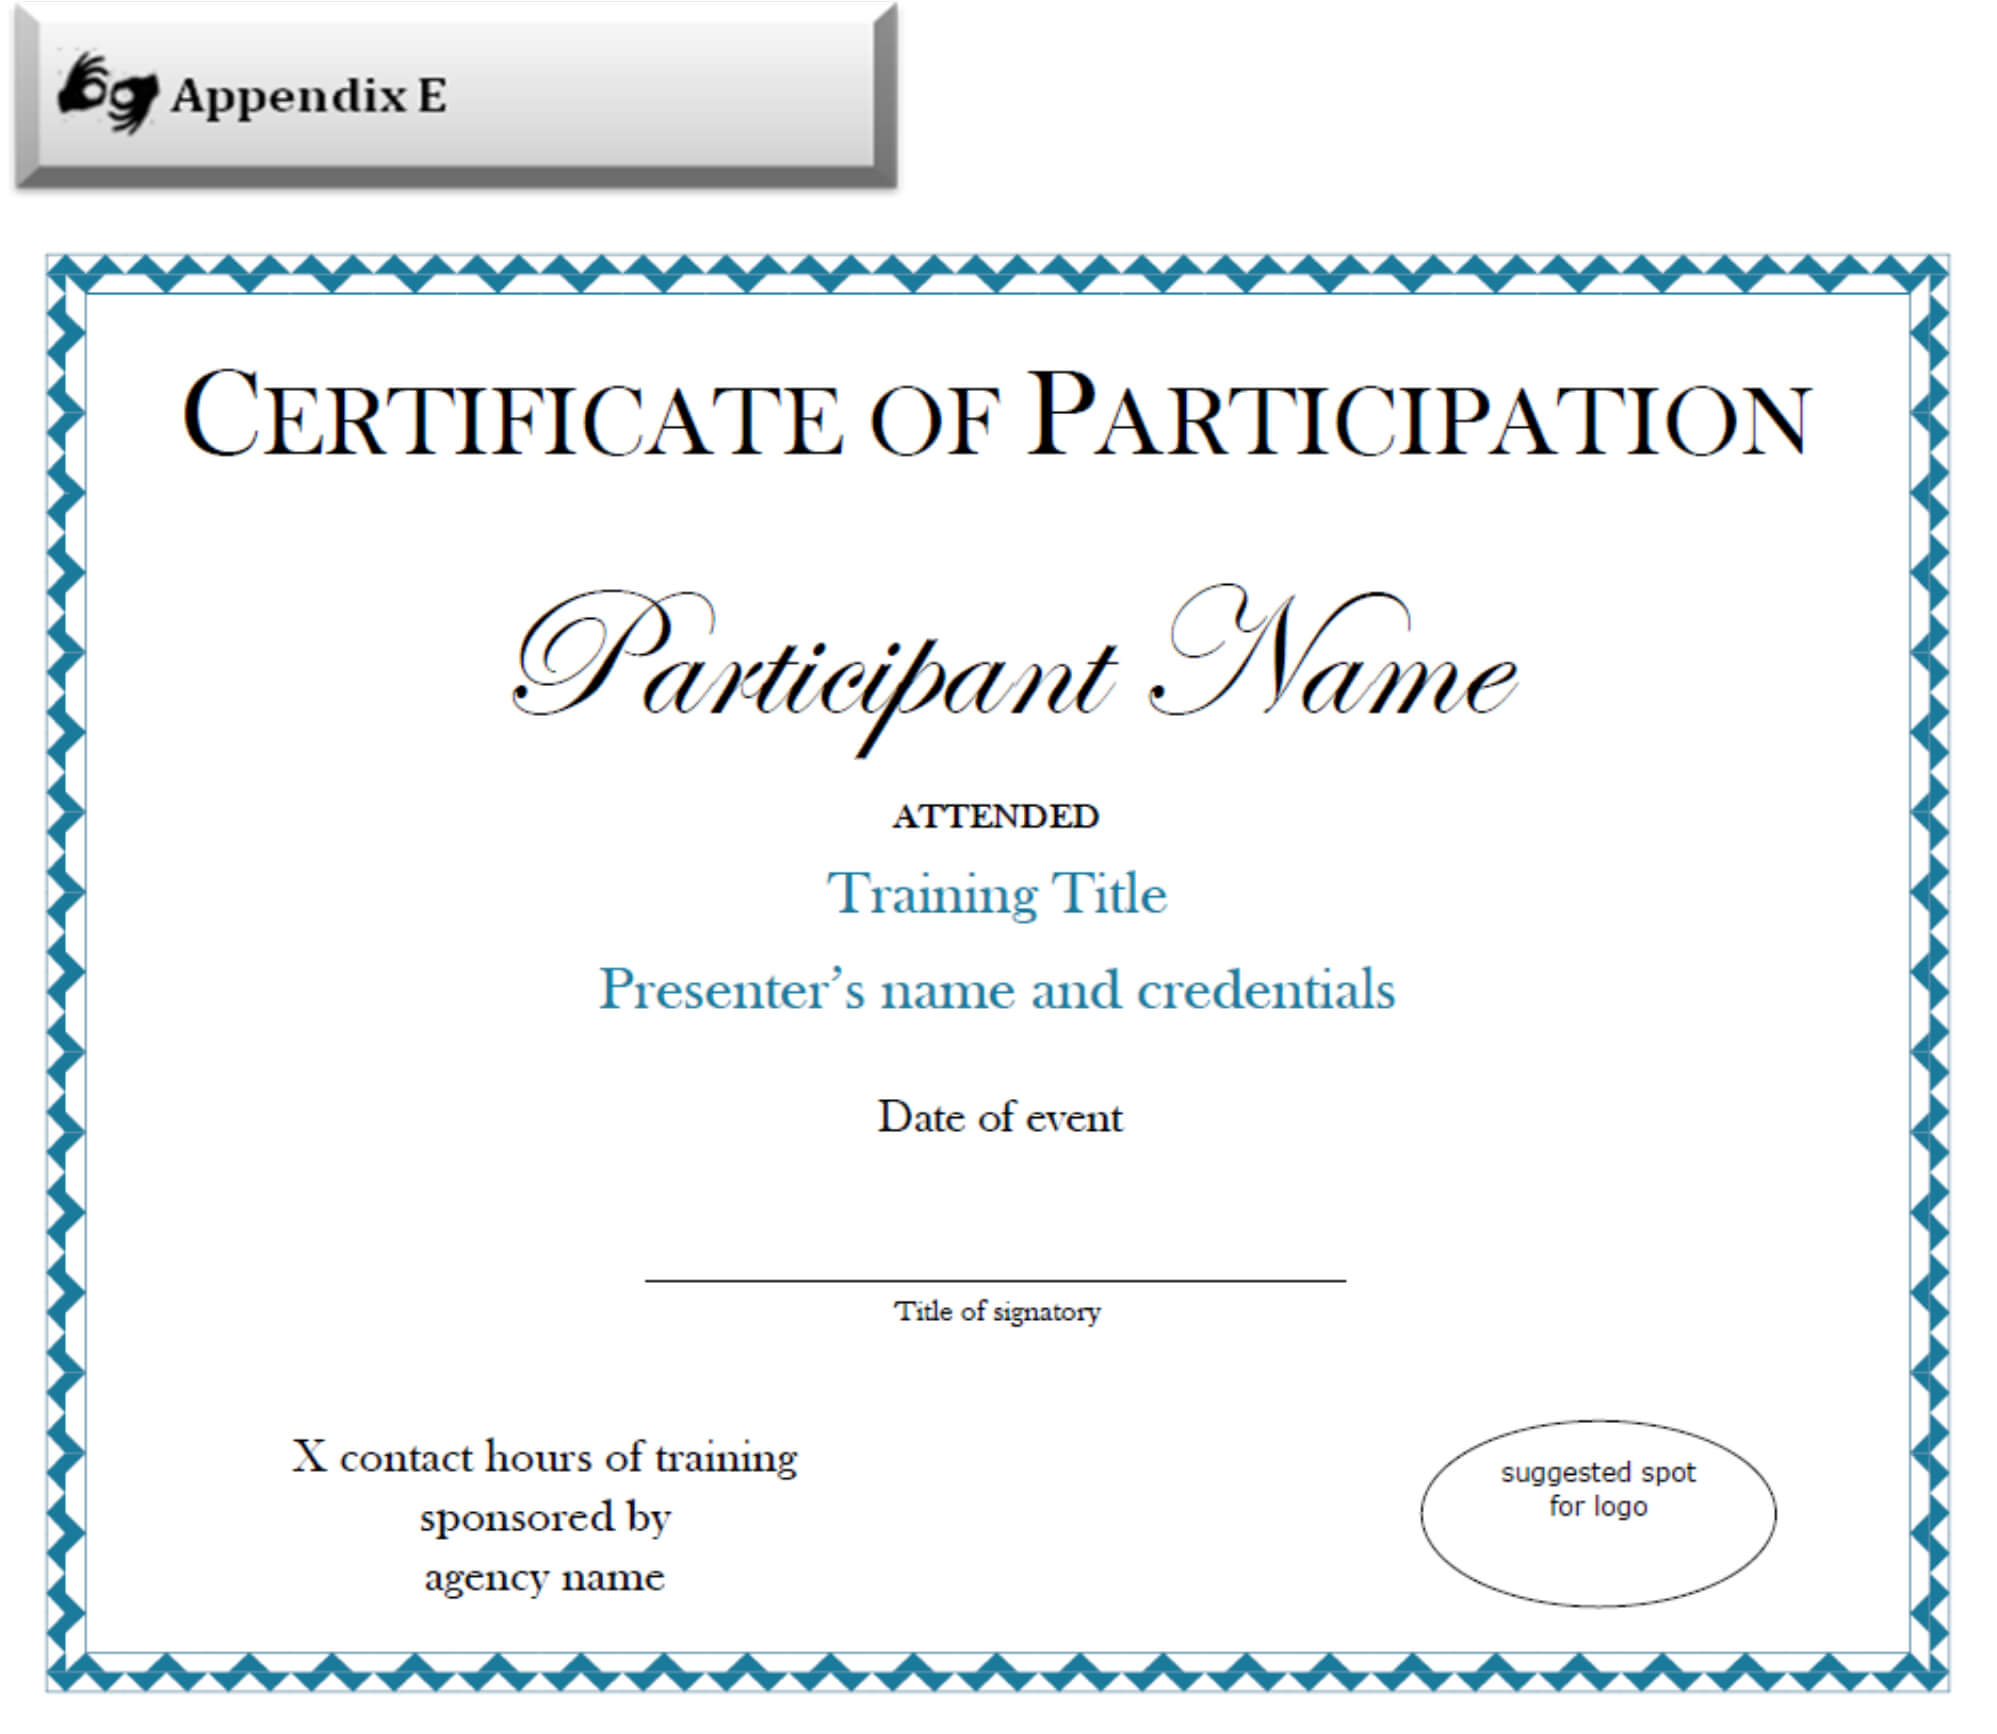 Certificate Of Participation Sample Free Download With Regard To Sample Certificate Of Participation Template